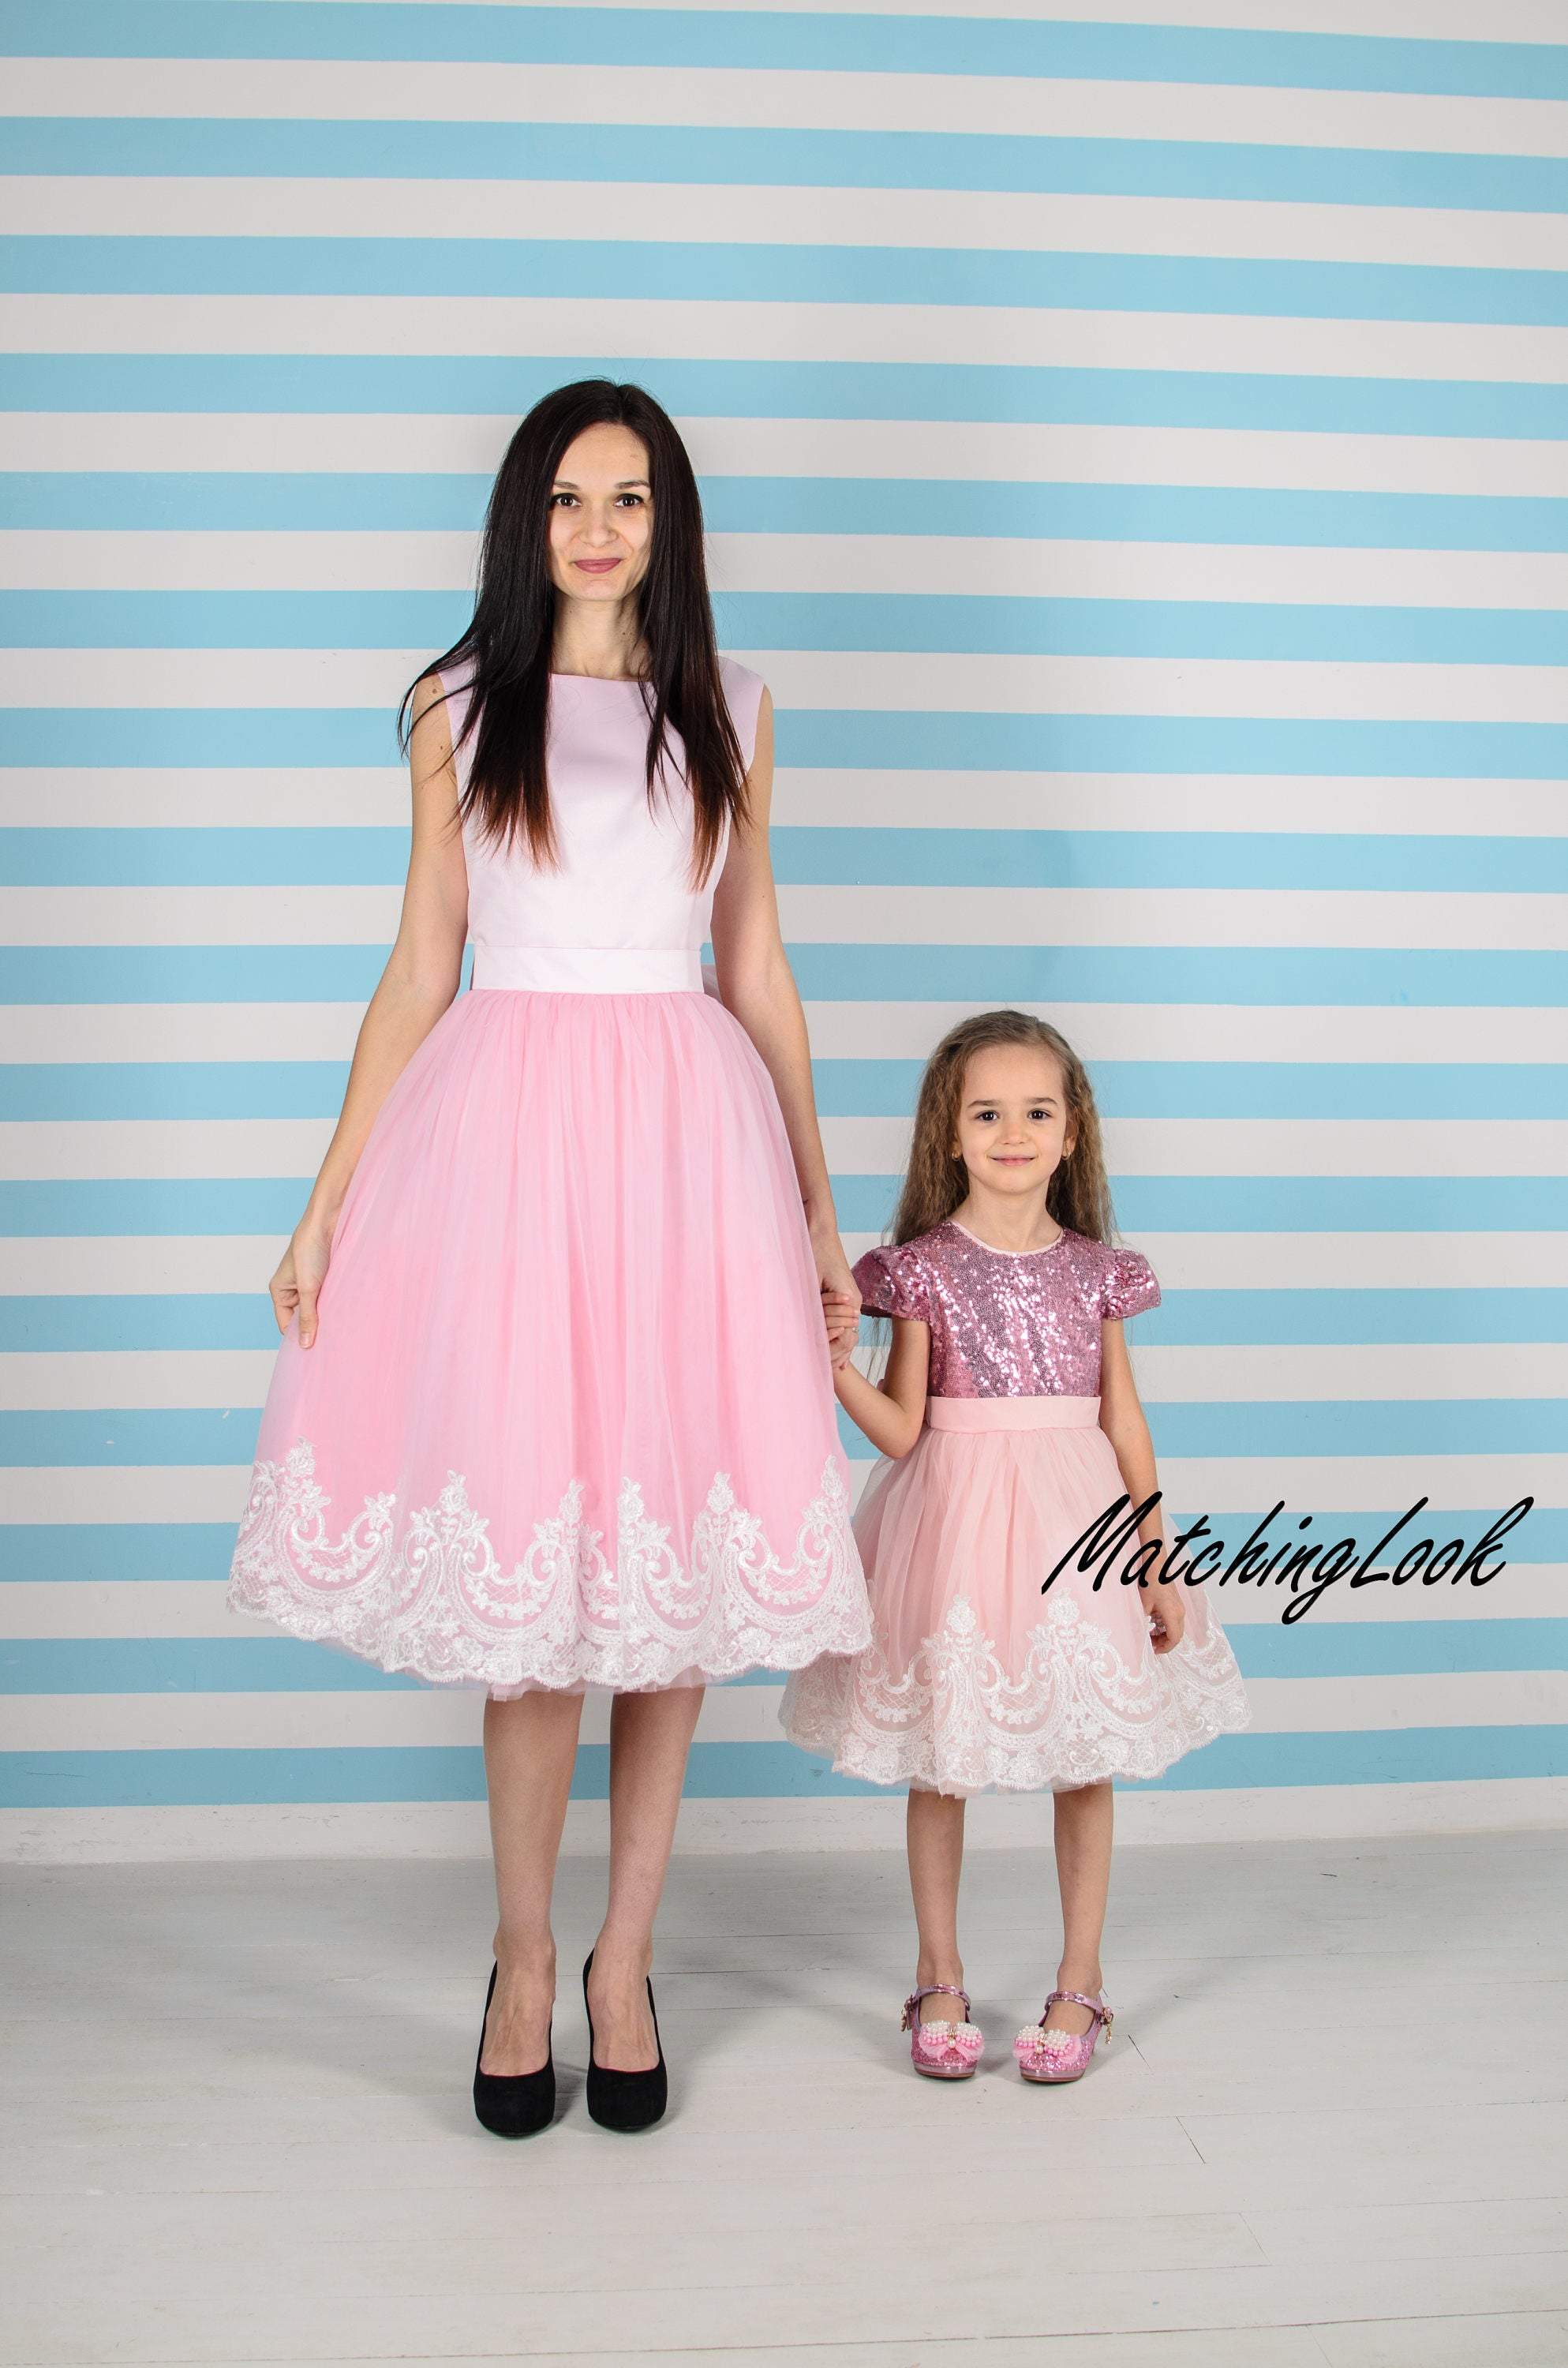 matching easter dresses for mom and daughter